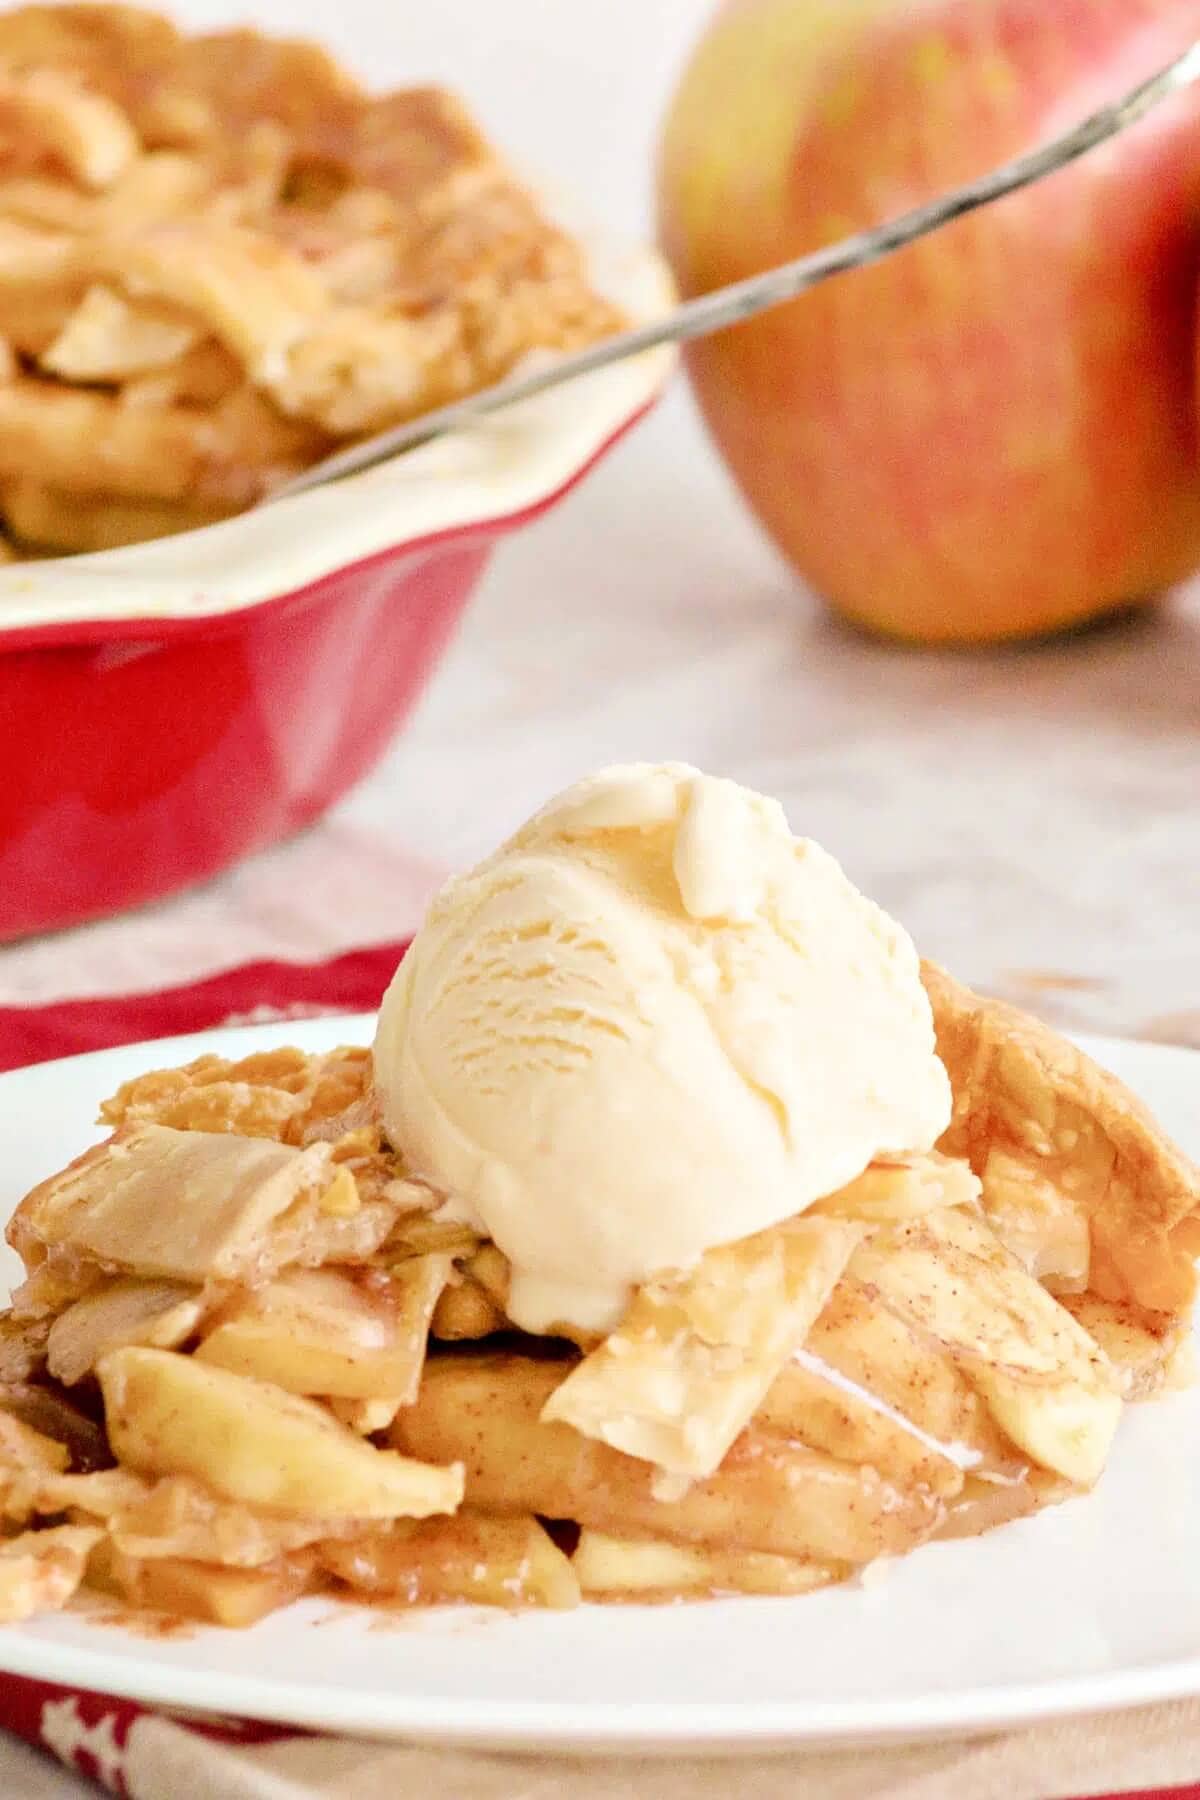 Country apple pie on plate.